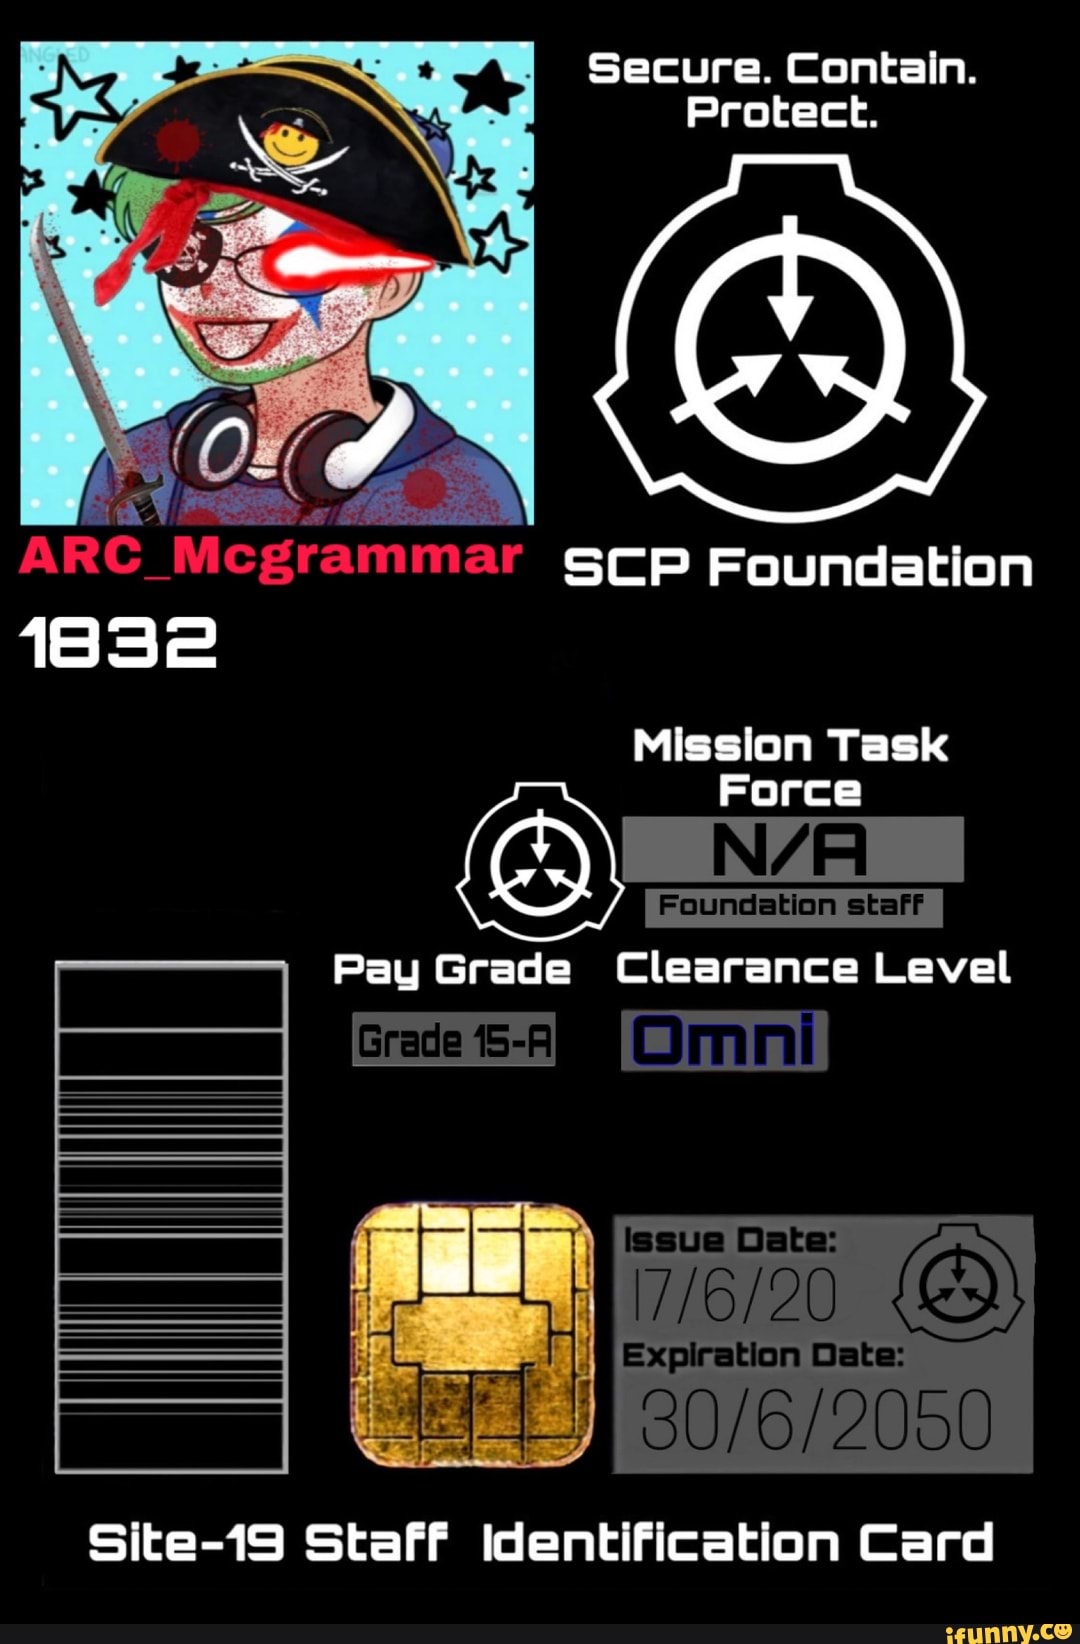 Can The SCP Foundation Contain Omni-Man? 